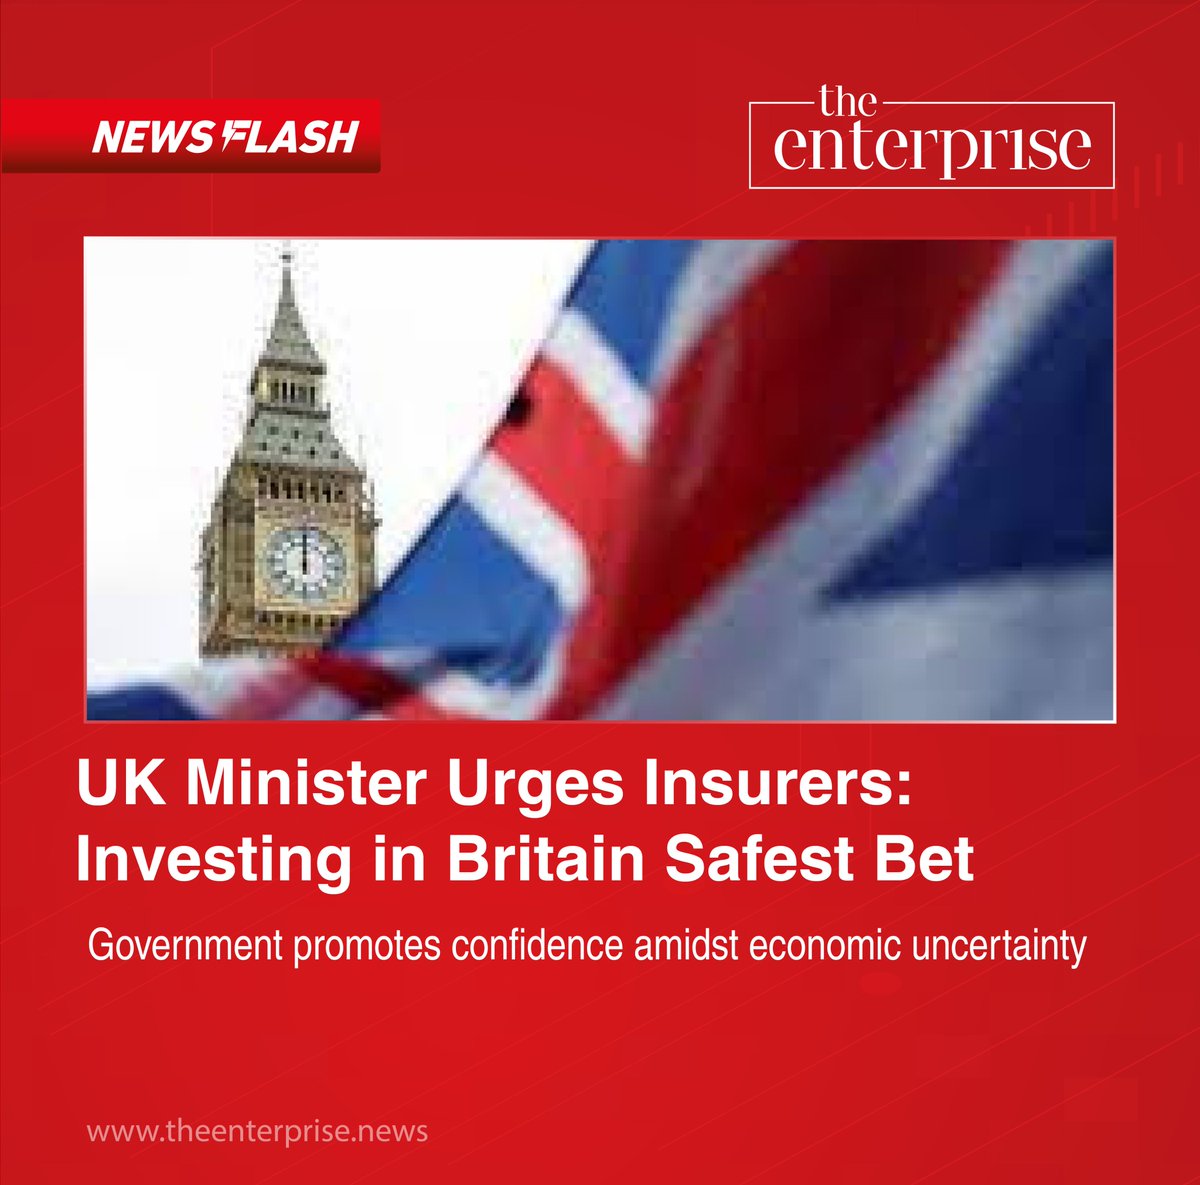 To know more, read the full article on #theenterprise

theenterprise.news/government/min…

#InsuranceInvestments #FinancialRegulation #BrexitDividend #InfrastructureFinance #RegulatoryReforms #globalbusiness #theenterprisenews #followformore #global #finance